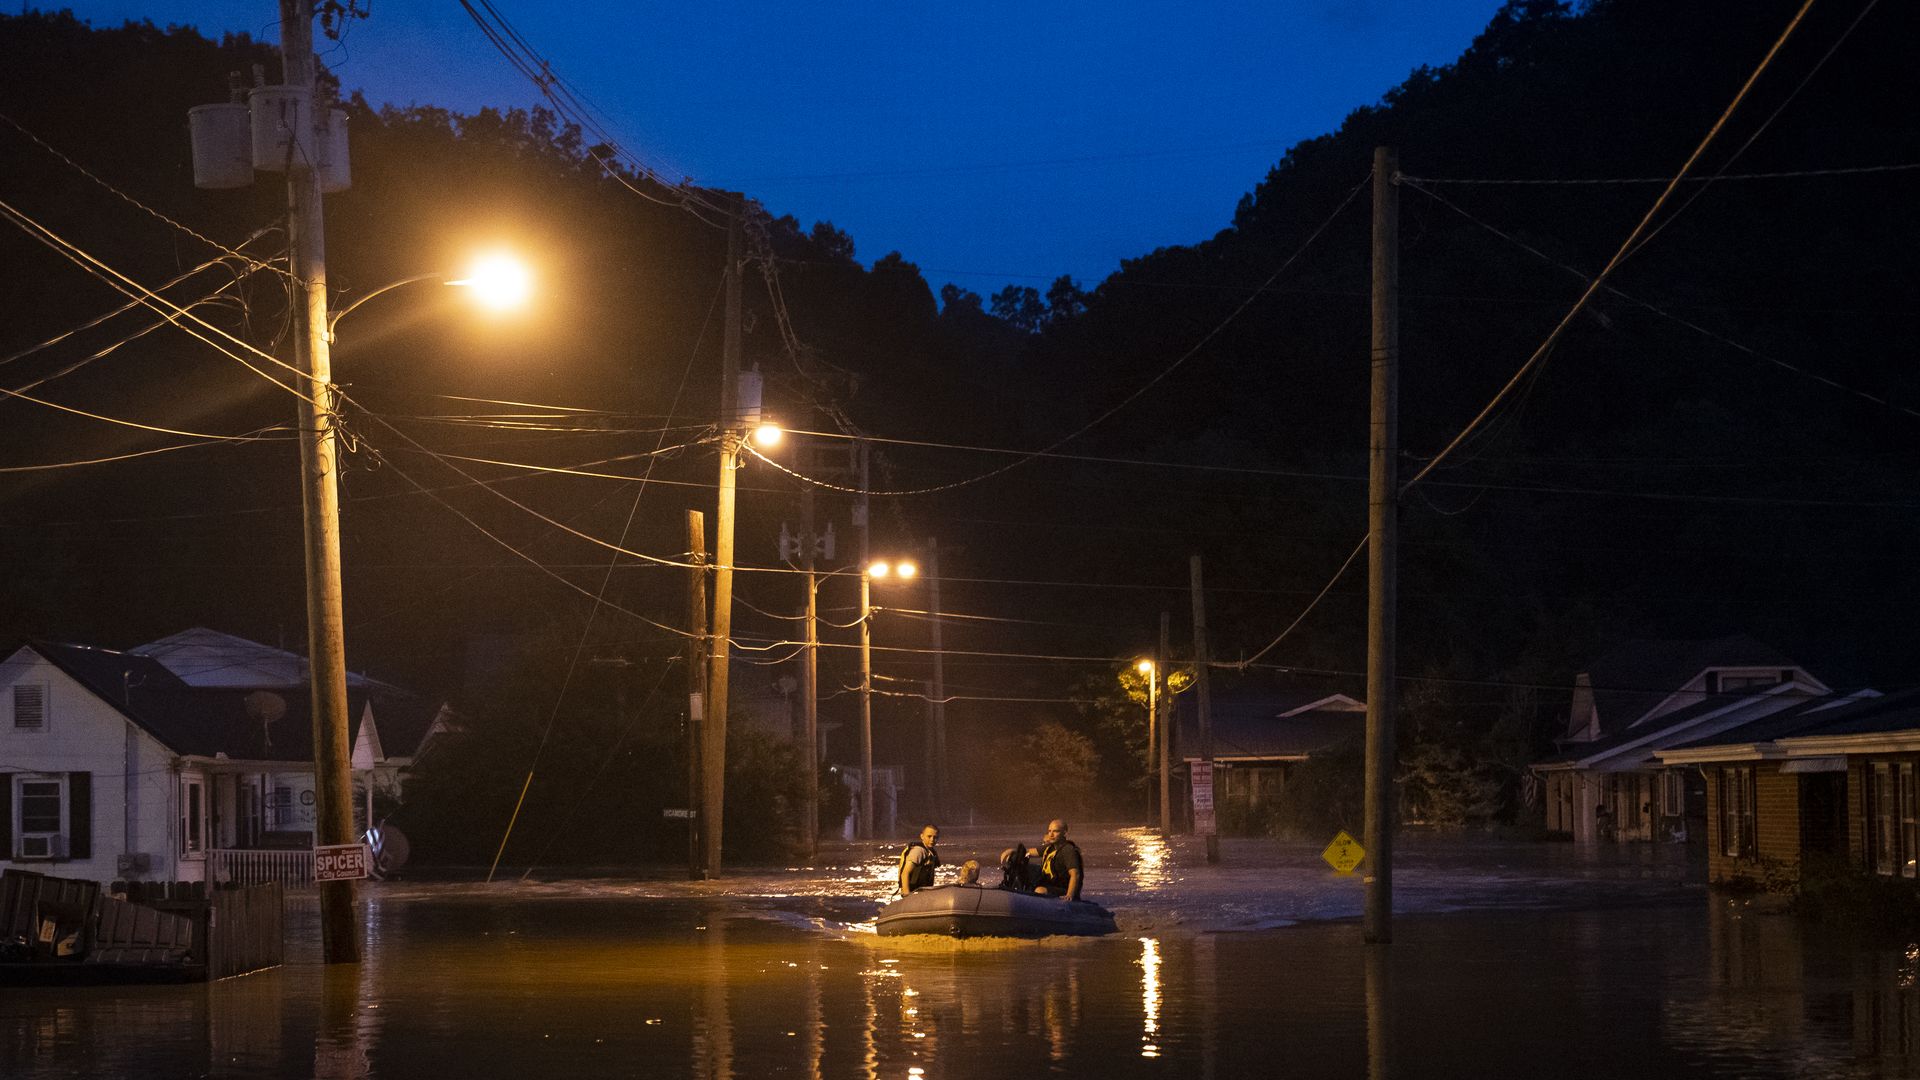 Search and rescue workers navigate a flooded street by boat